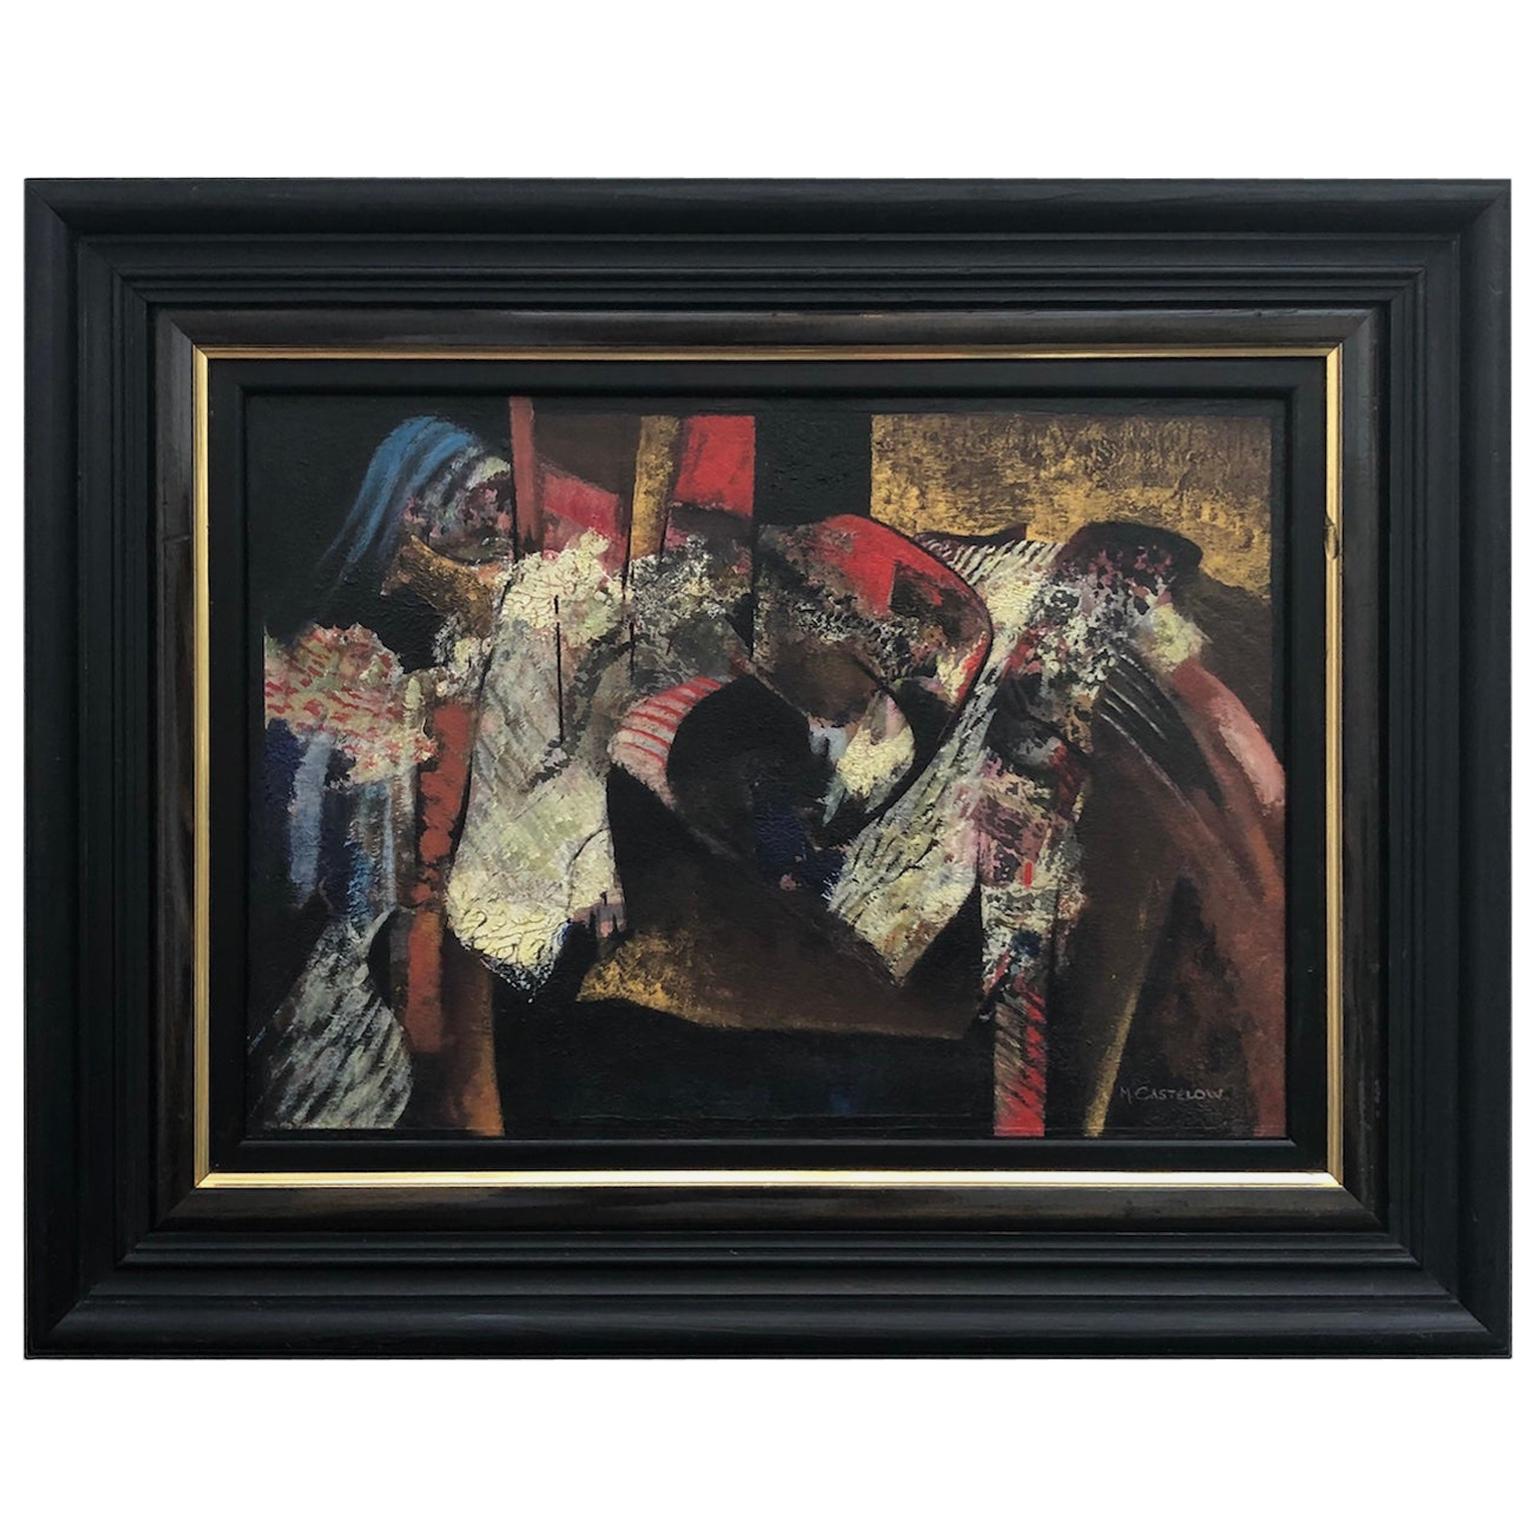 Abstract Oil Painting by Margaret Castelow, ‘The Dressing Room’, circa 1980